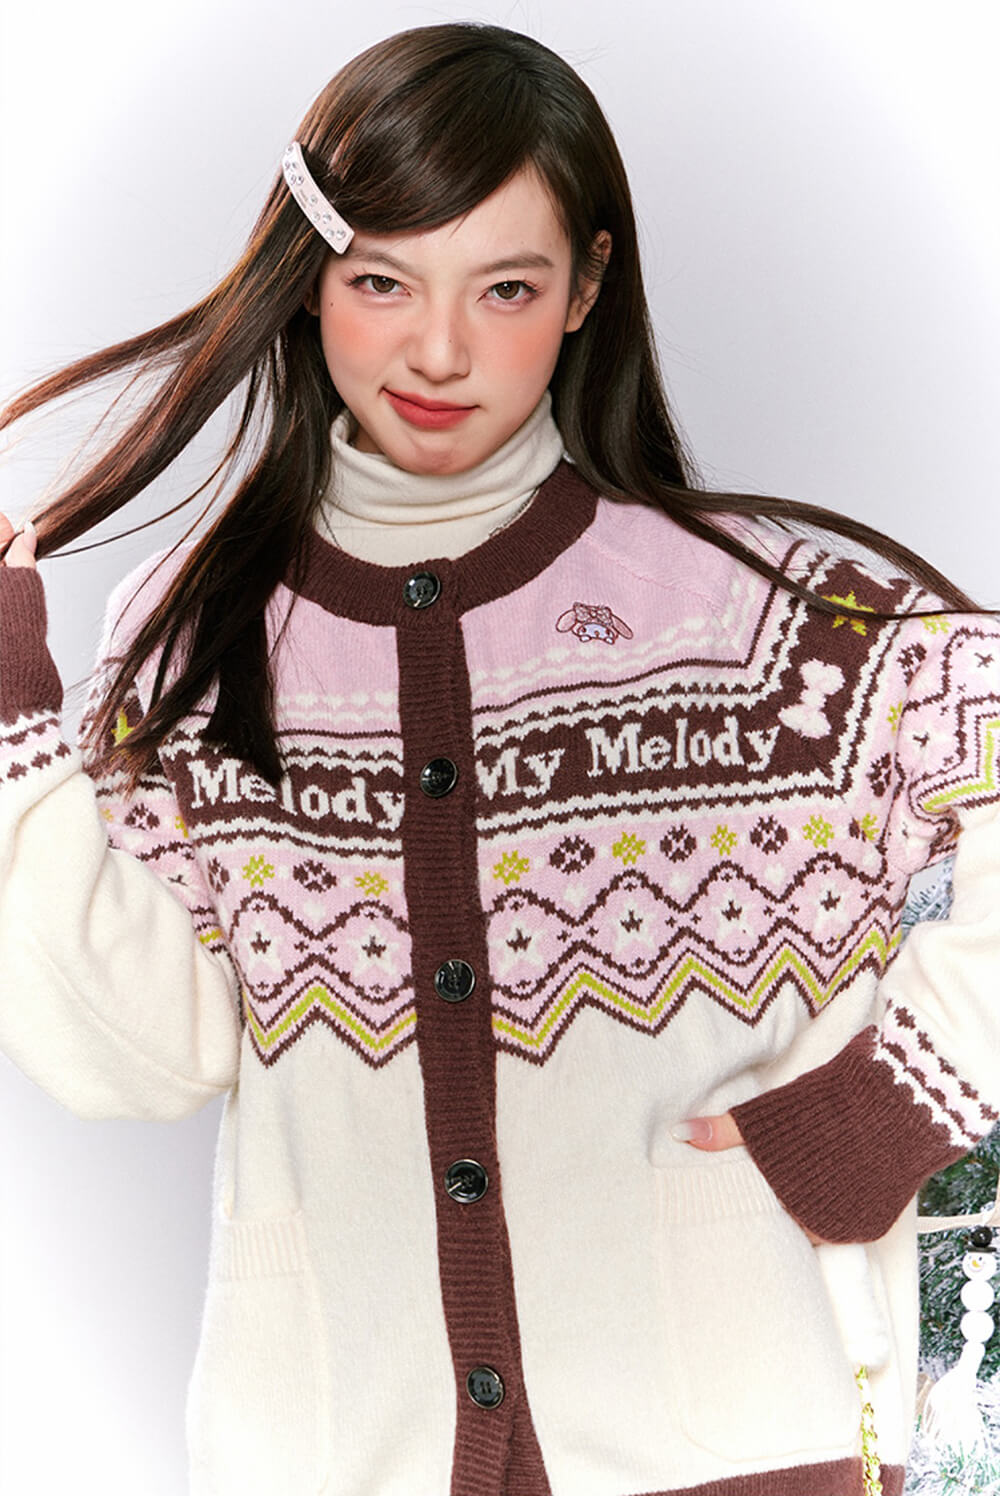 Sanrio-Authorized-My-Melody-Embroidery-Round-Neck-Off-Shoulder-Knit-Sweater-Cardigan-in-pink-brown